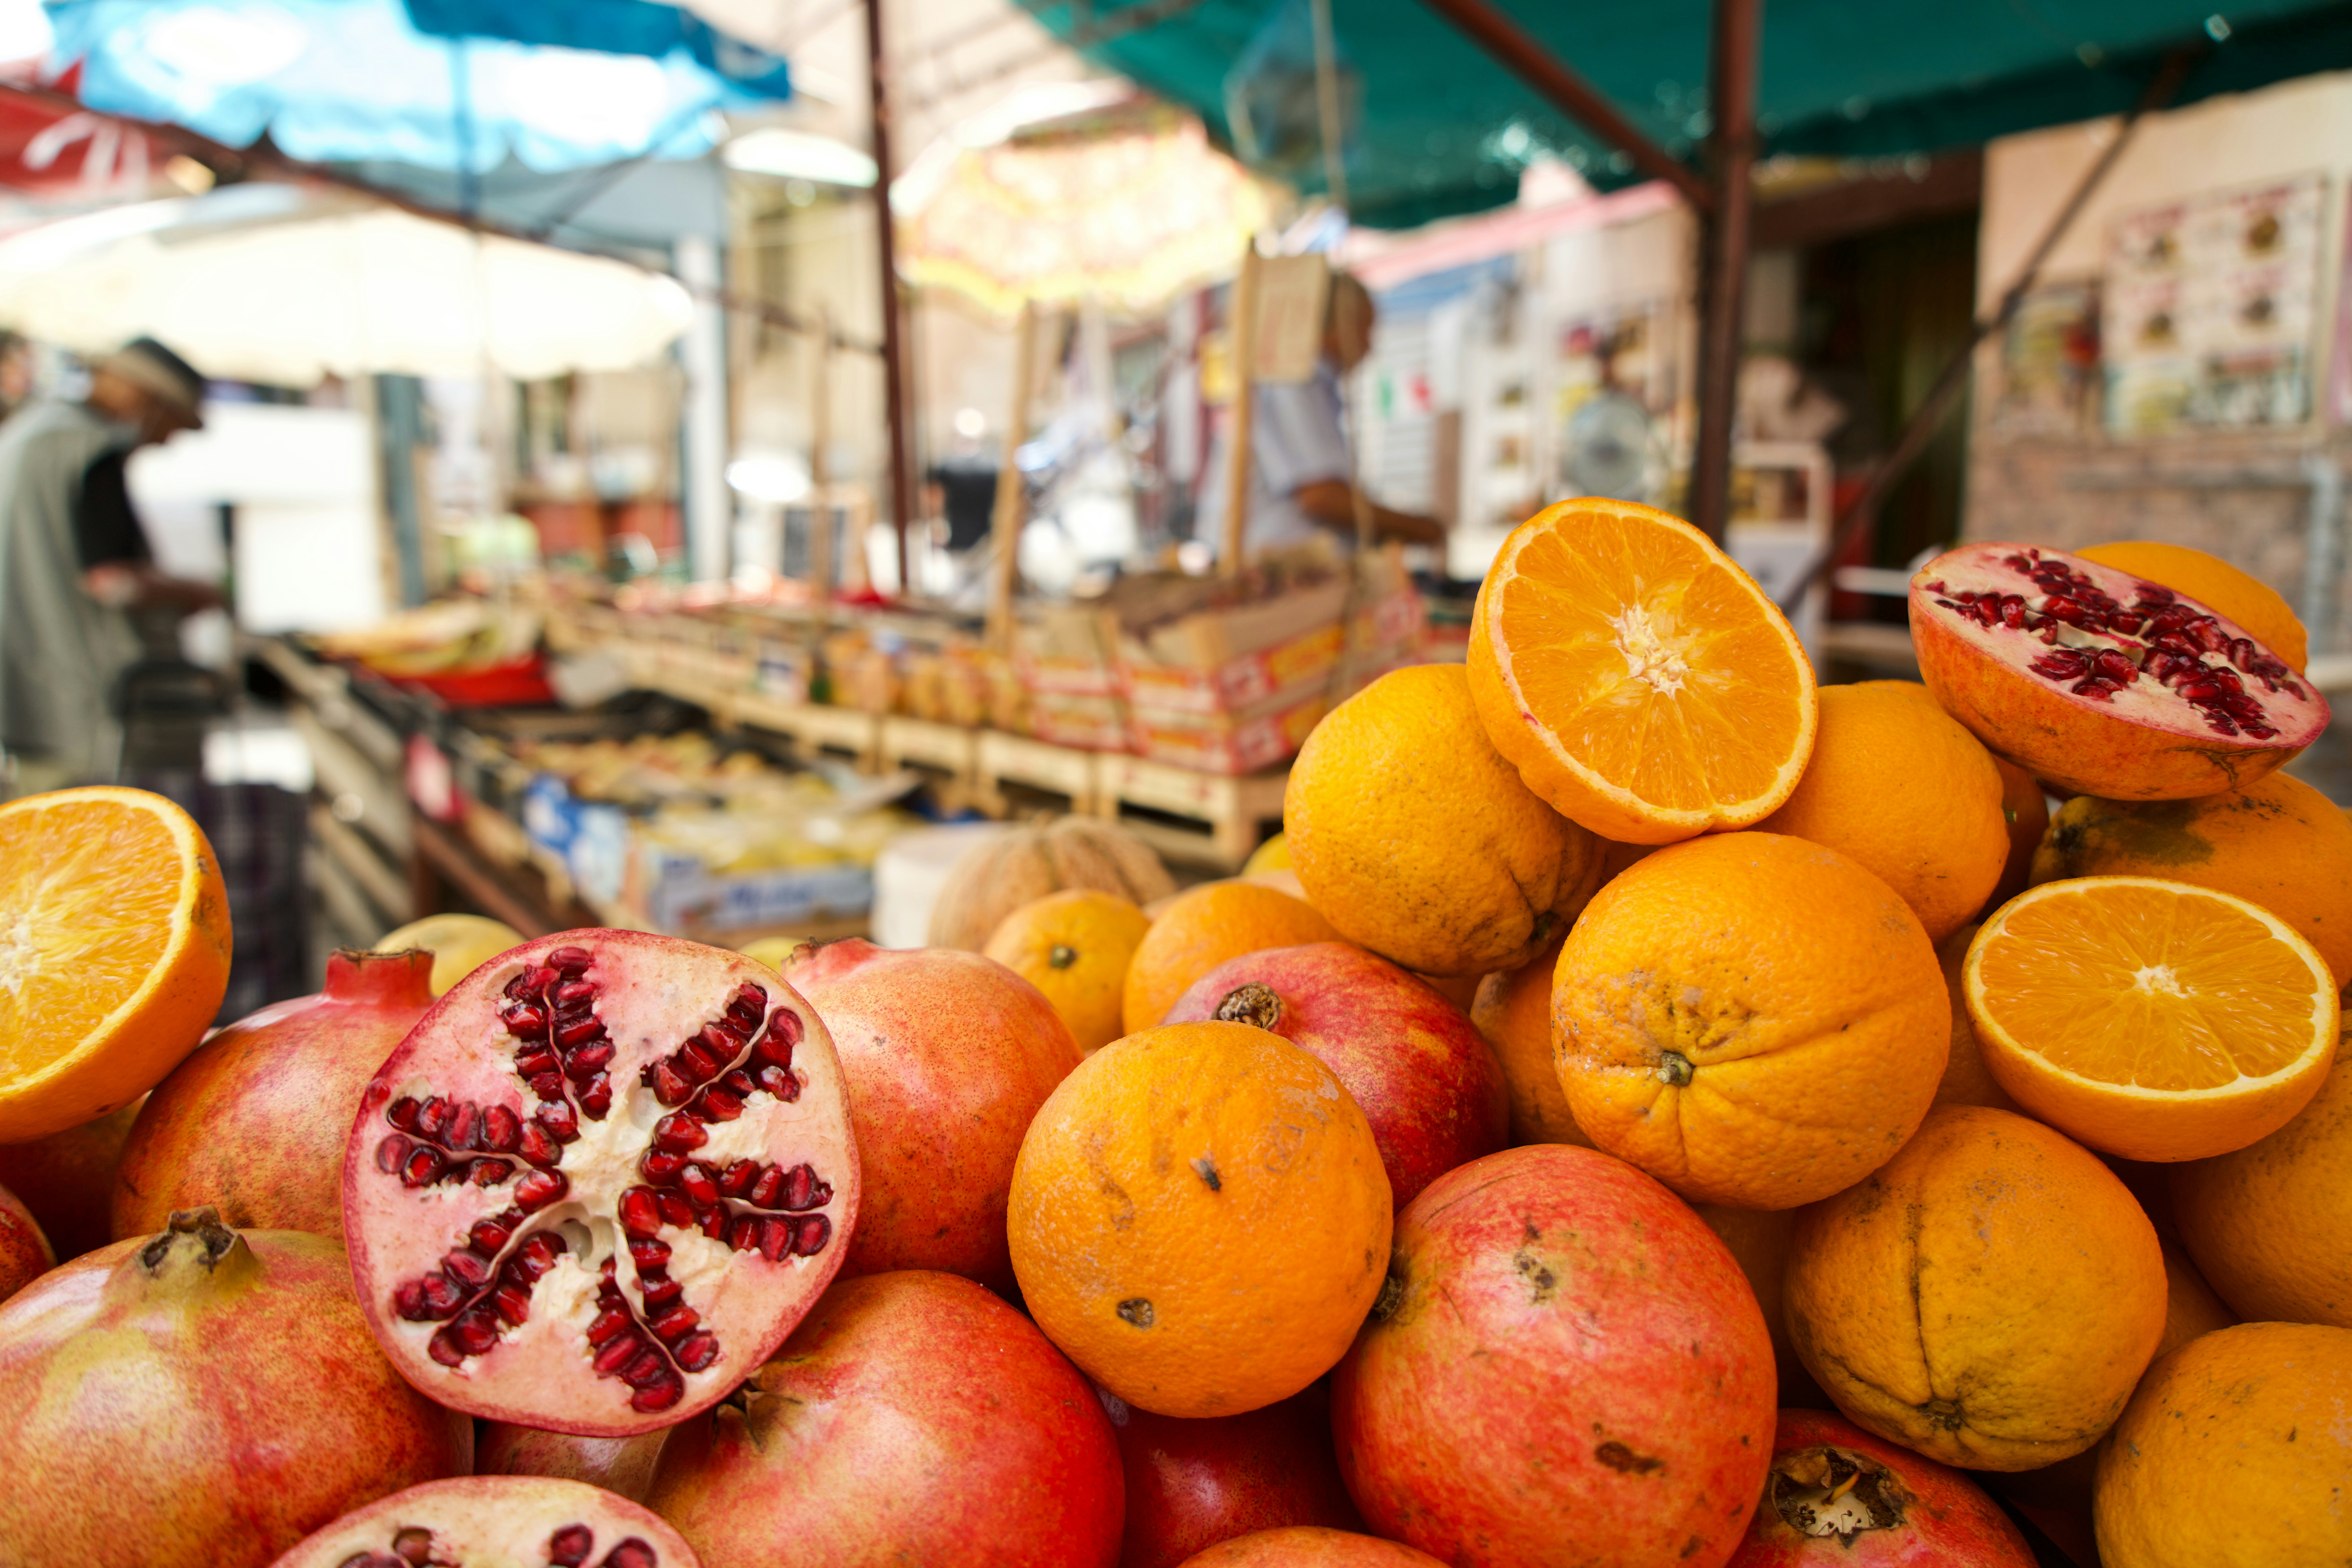 Pomegranates and oranges piled high at a market in Italy